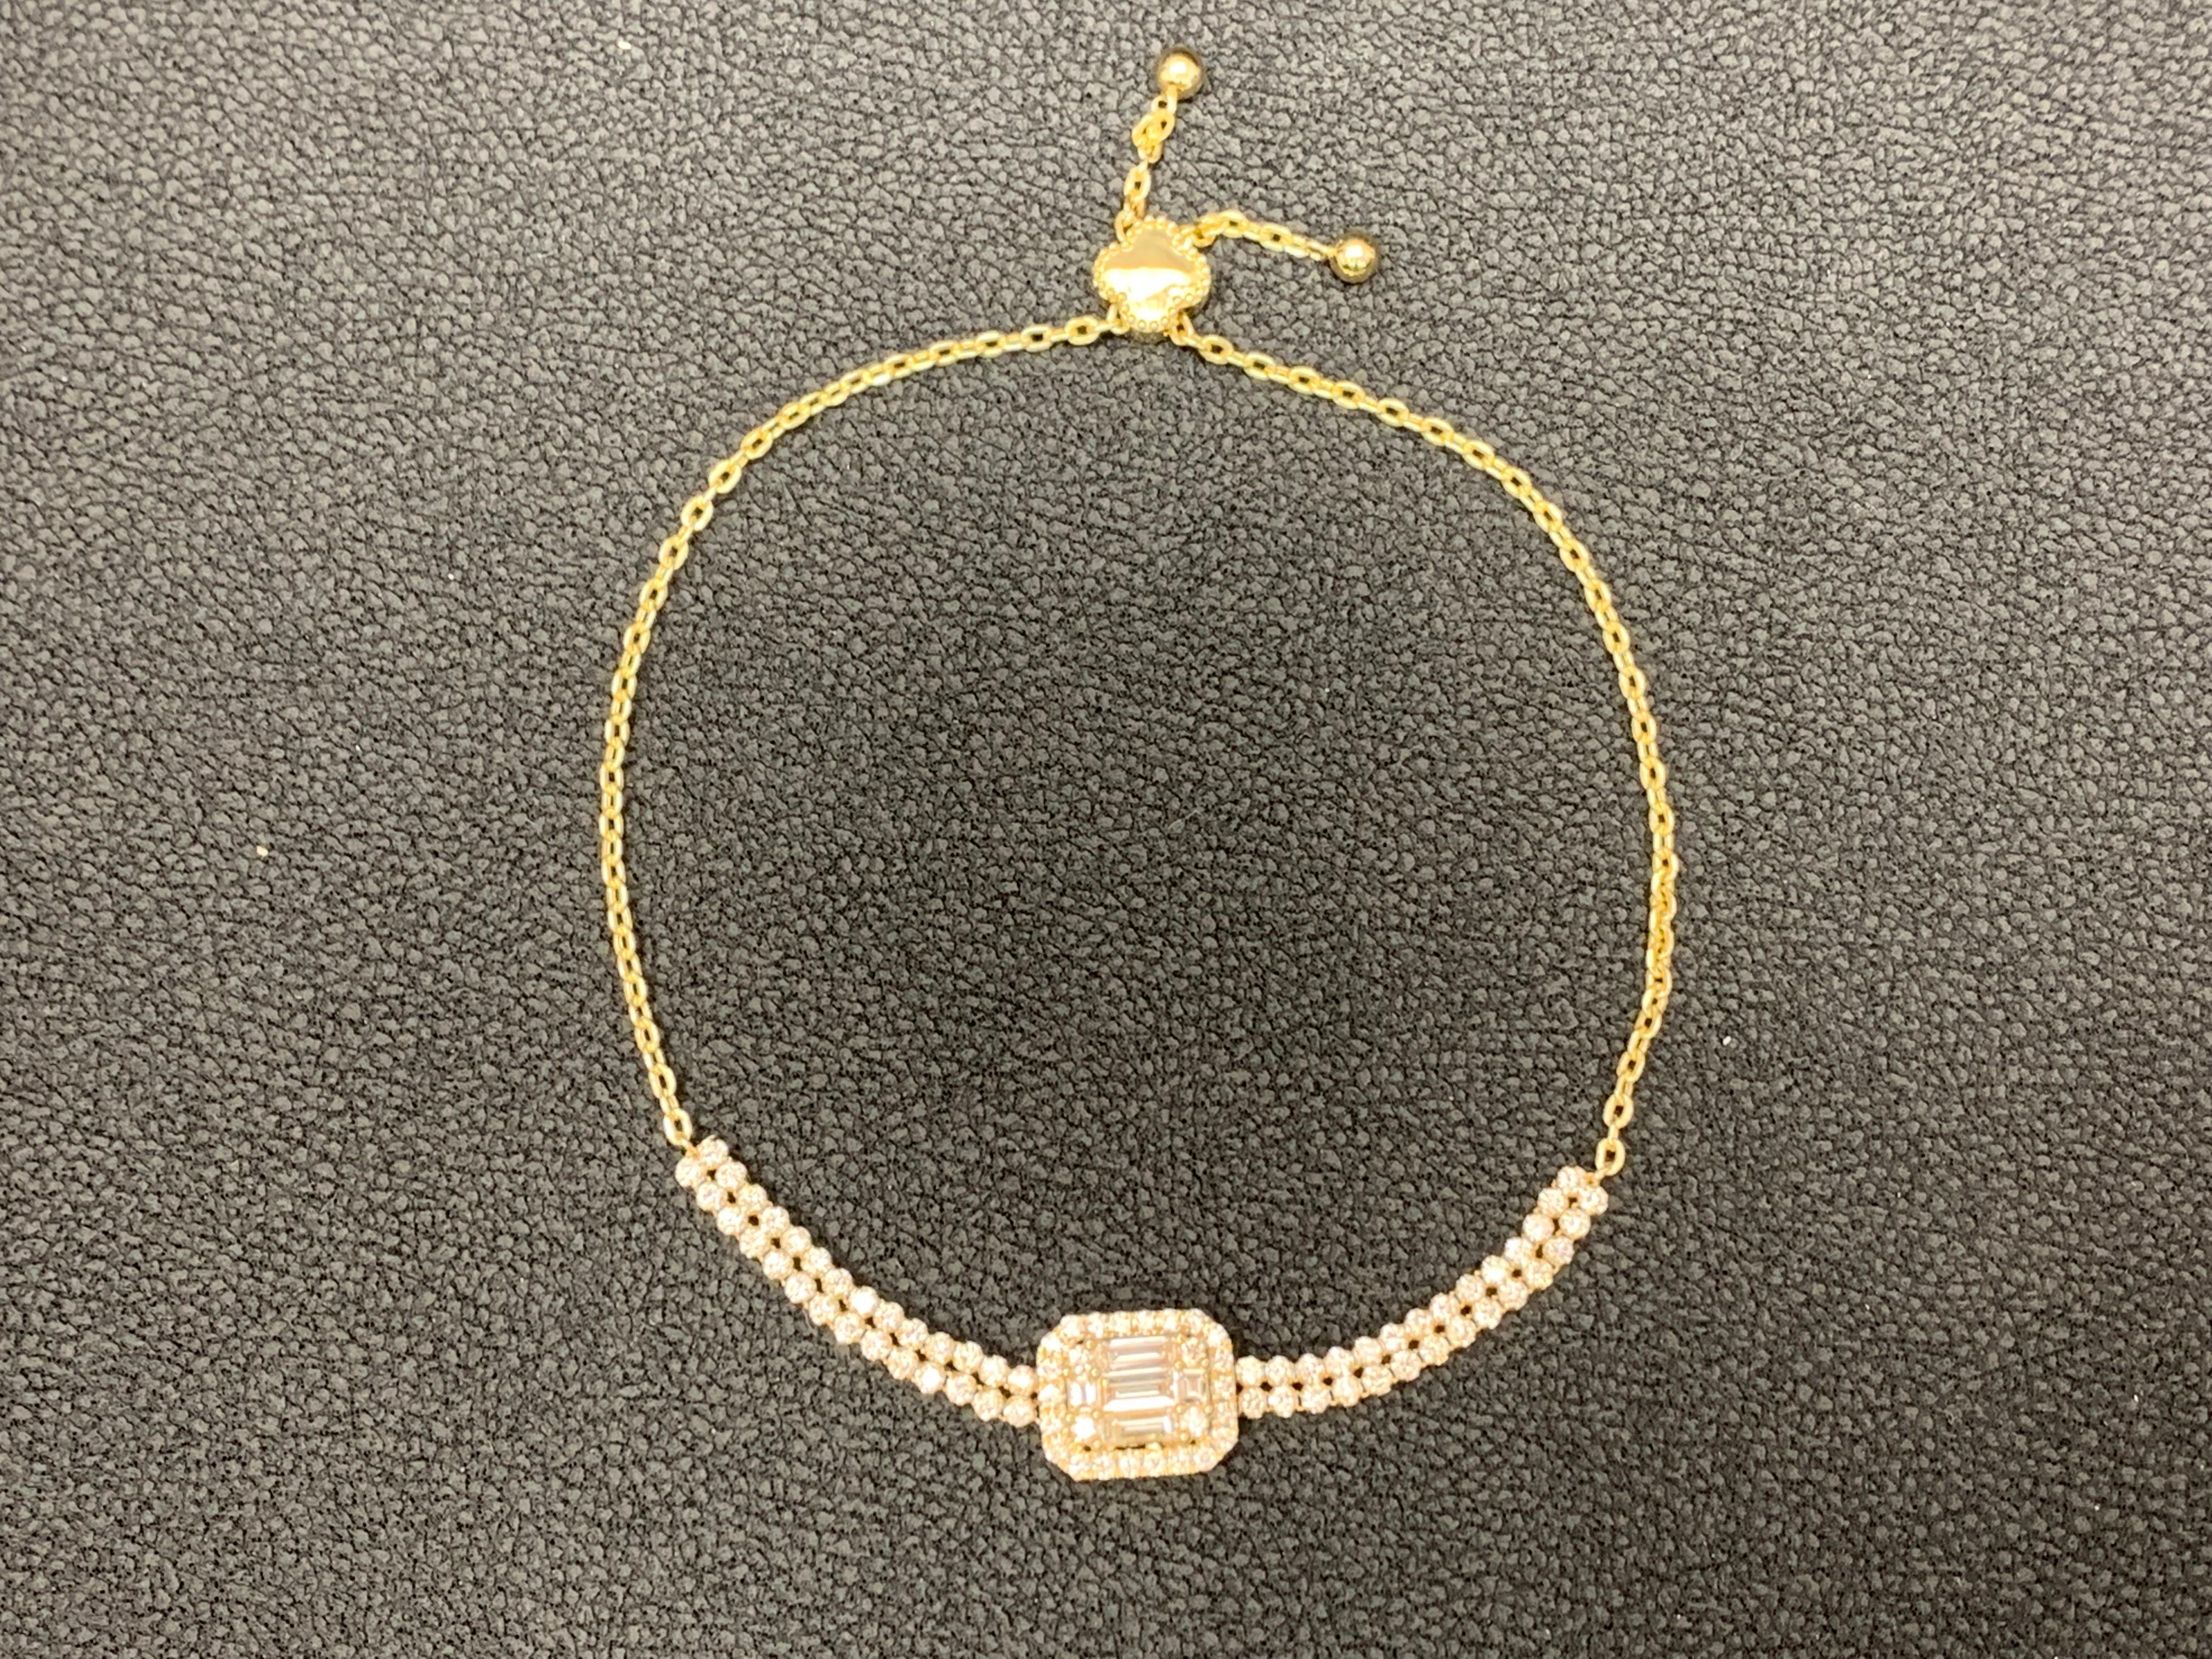 Are you looking to make an adjustment to your style? Well then slide this elegant adjustable bracelet around your wrist is just what you need! This 14k yellow gold bracelet forms a classic design adorned with a center cluster of baguette and round